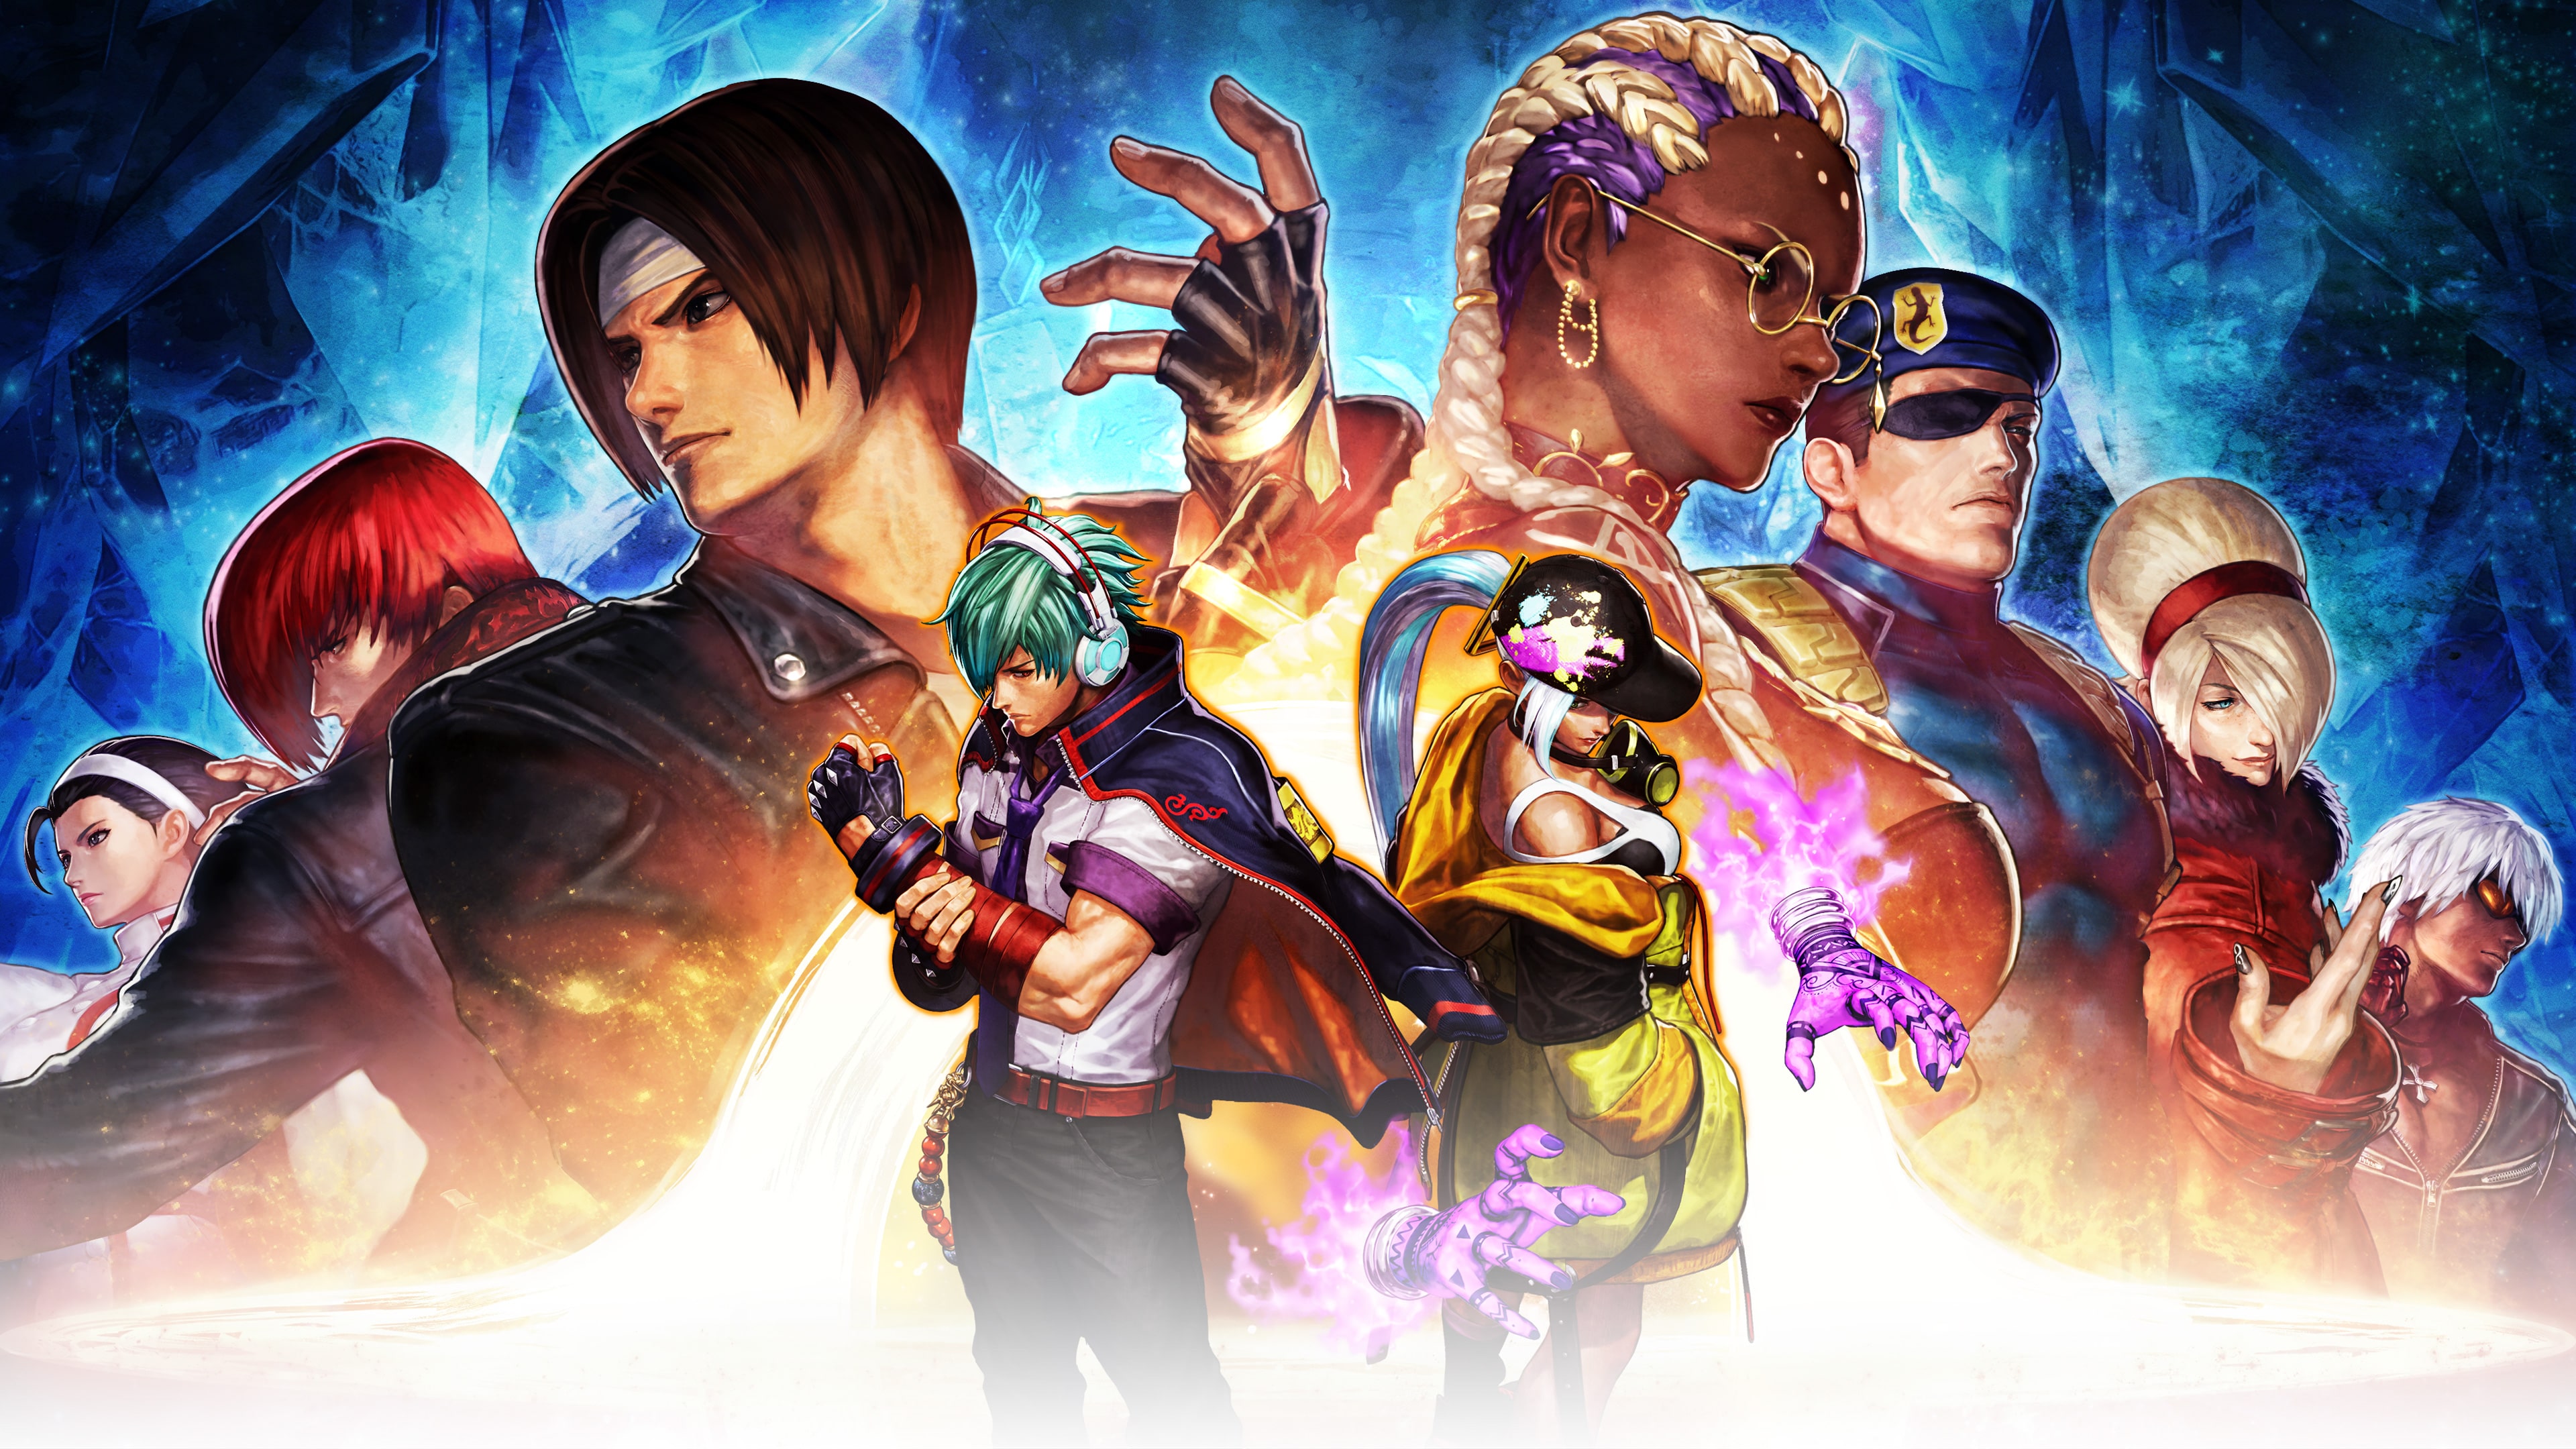 THE KING OF FIGHTERS XV DEMO